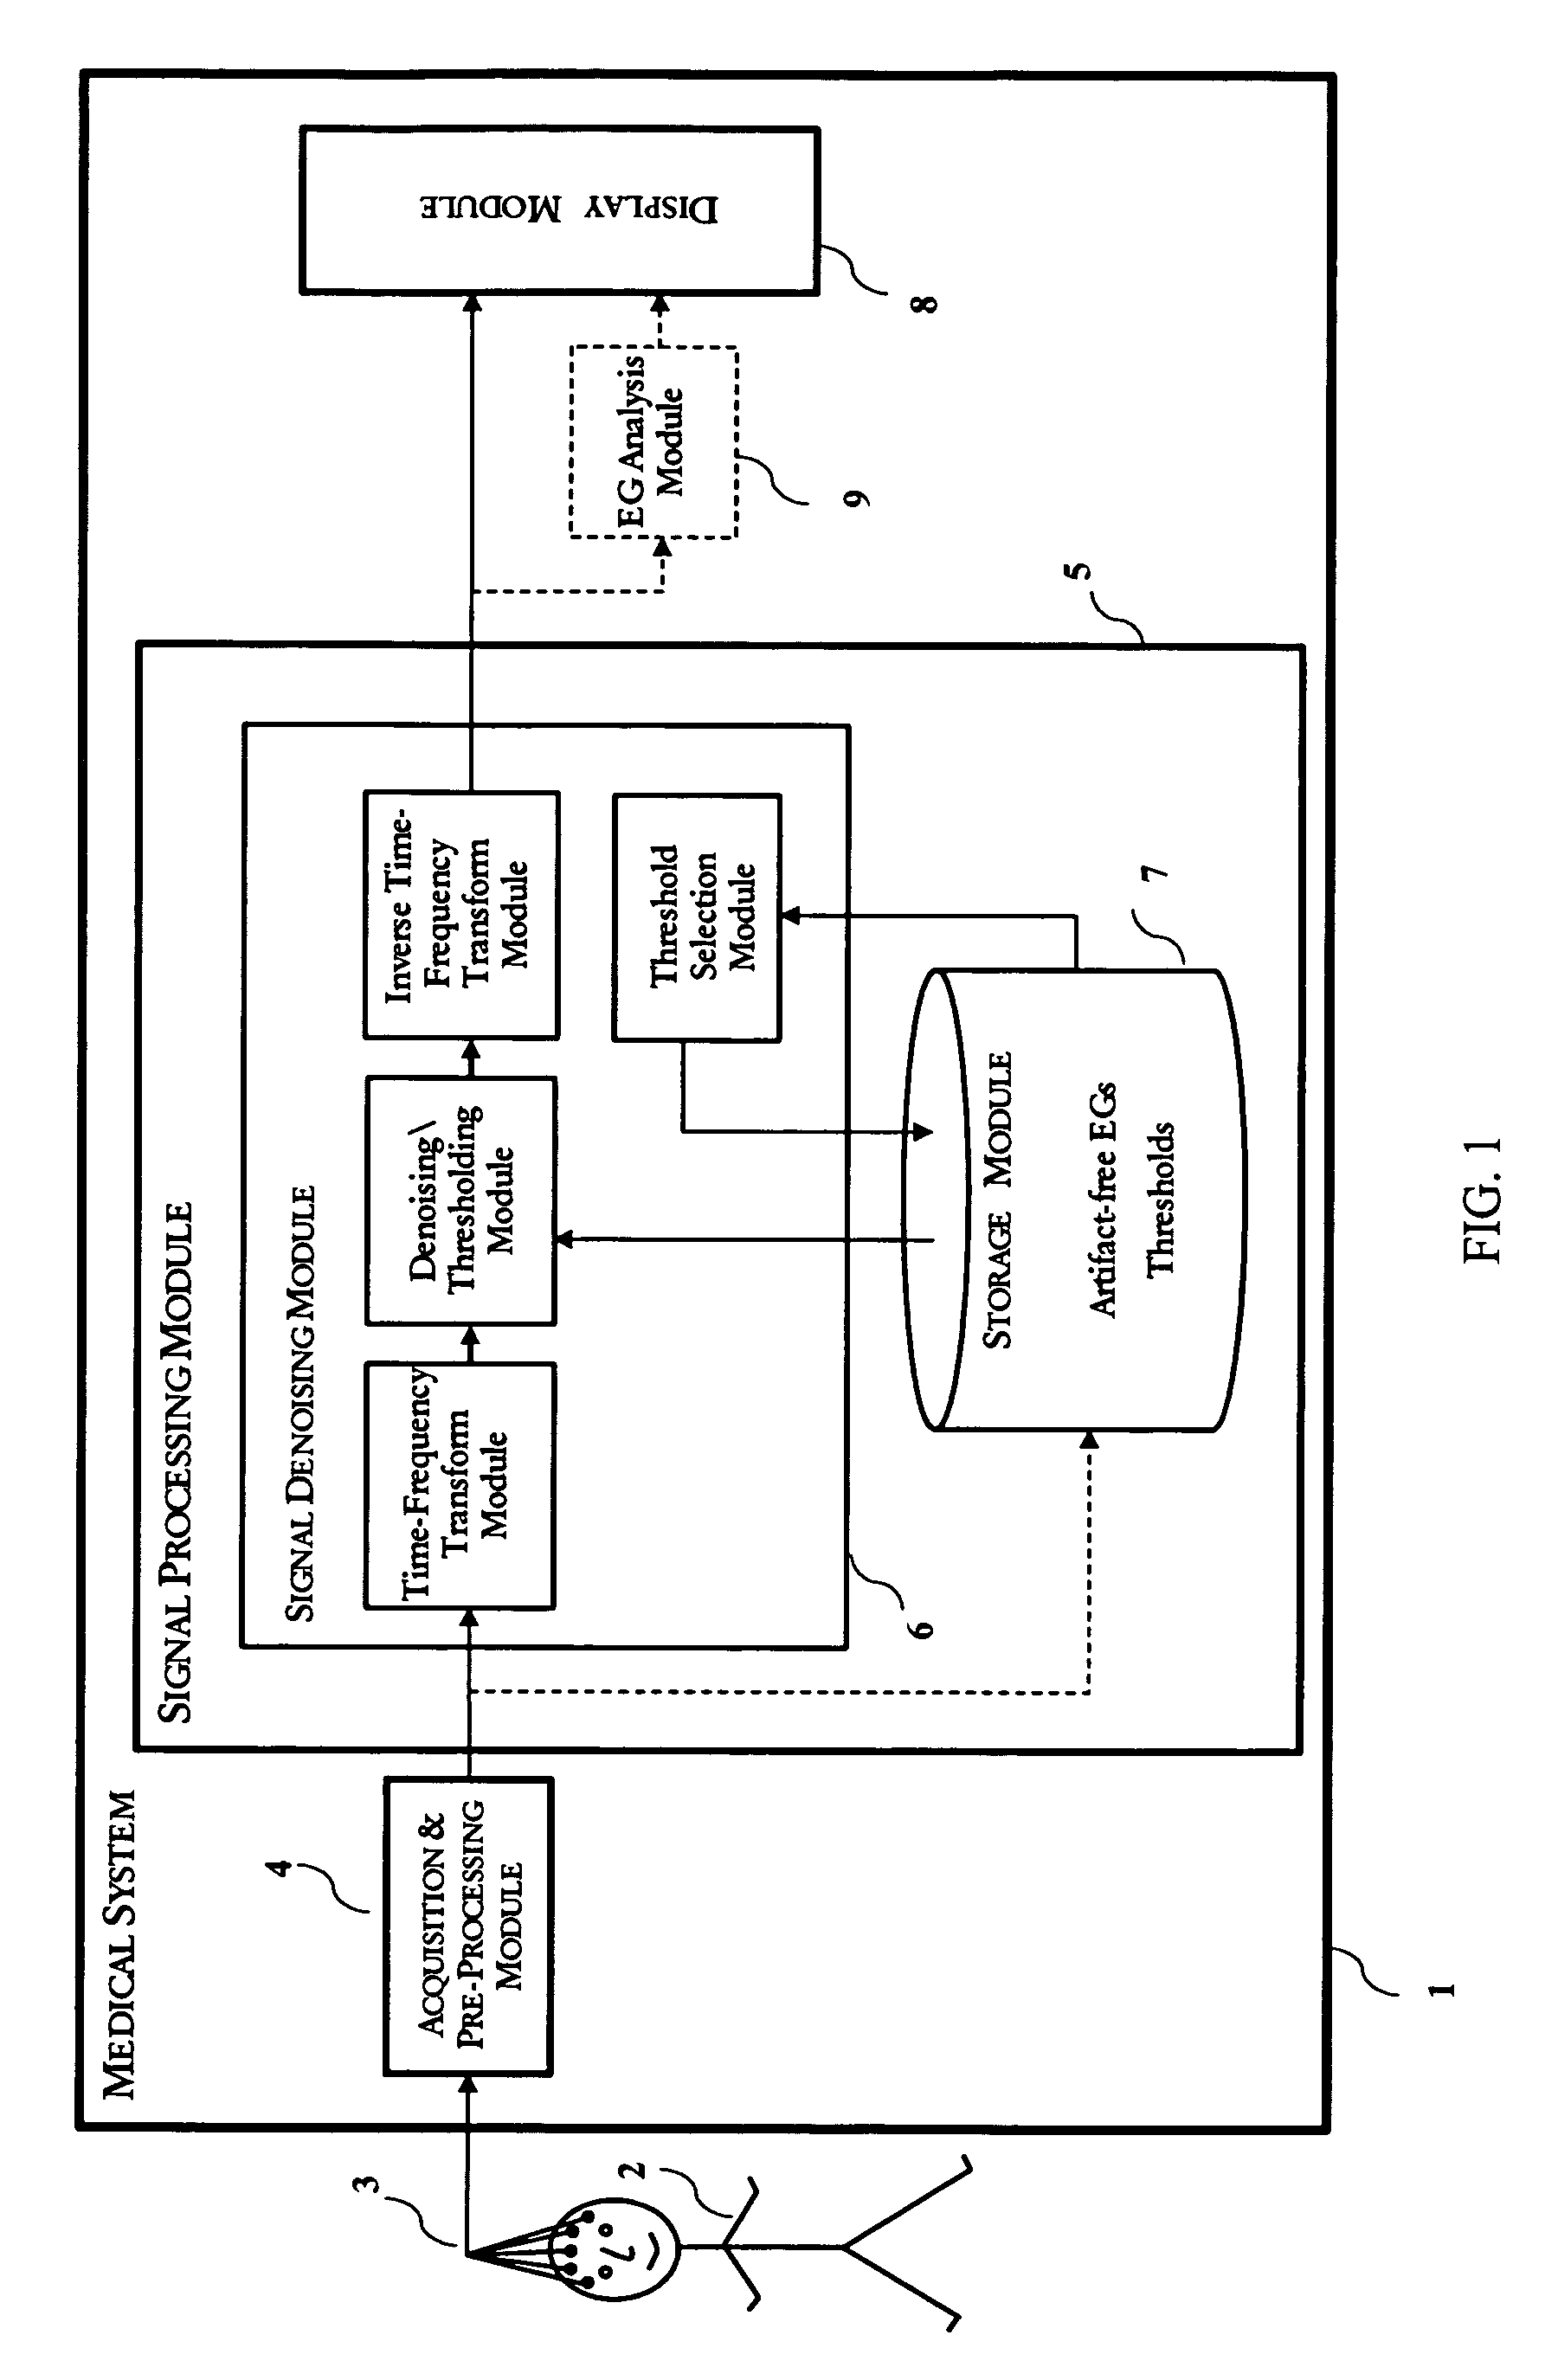 Method and system for the denoising of large-amplitude artifacts in electrograms using time-frequency transforms